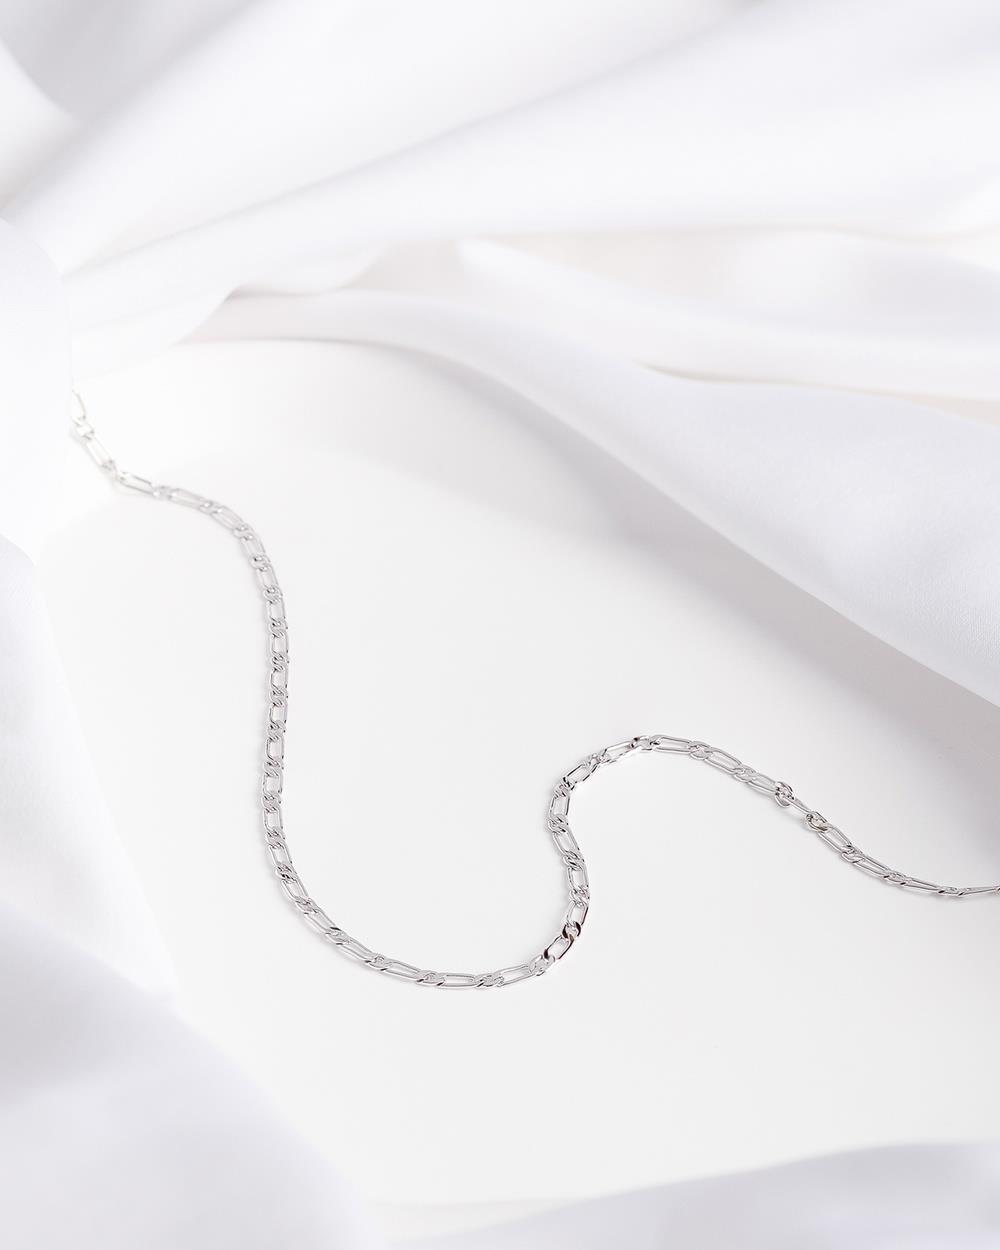 Wanderlust + Co - Figaro Chain Silver Necklace - Jewellery (Silver) Figaro Chain Silver Necklace